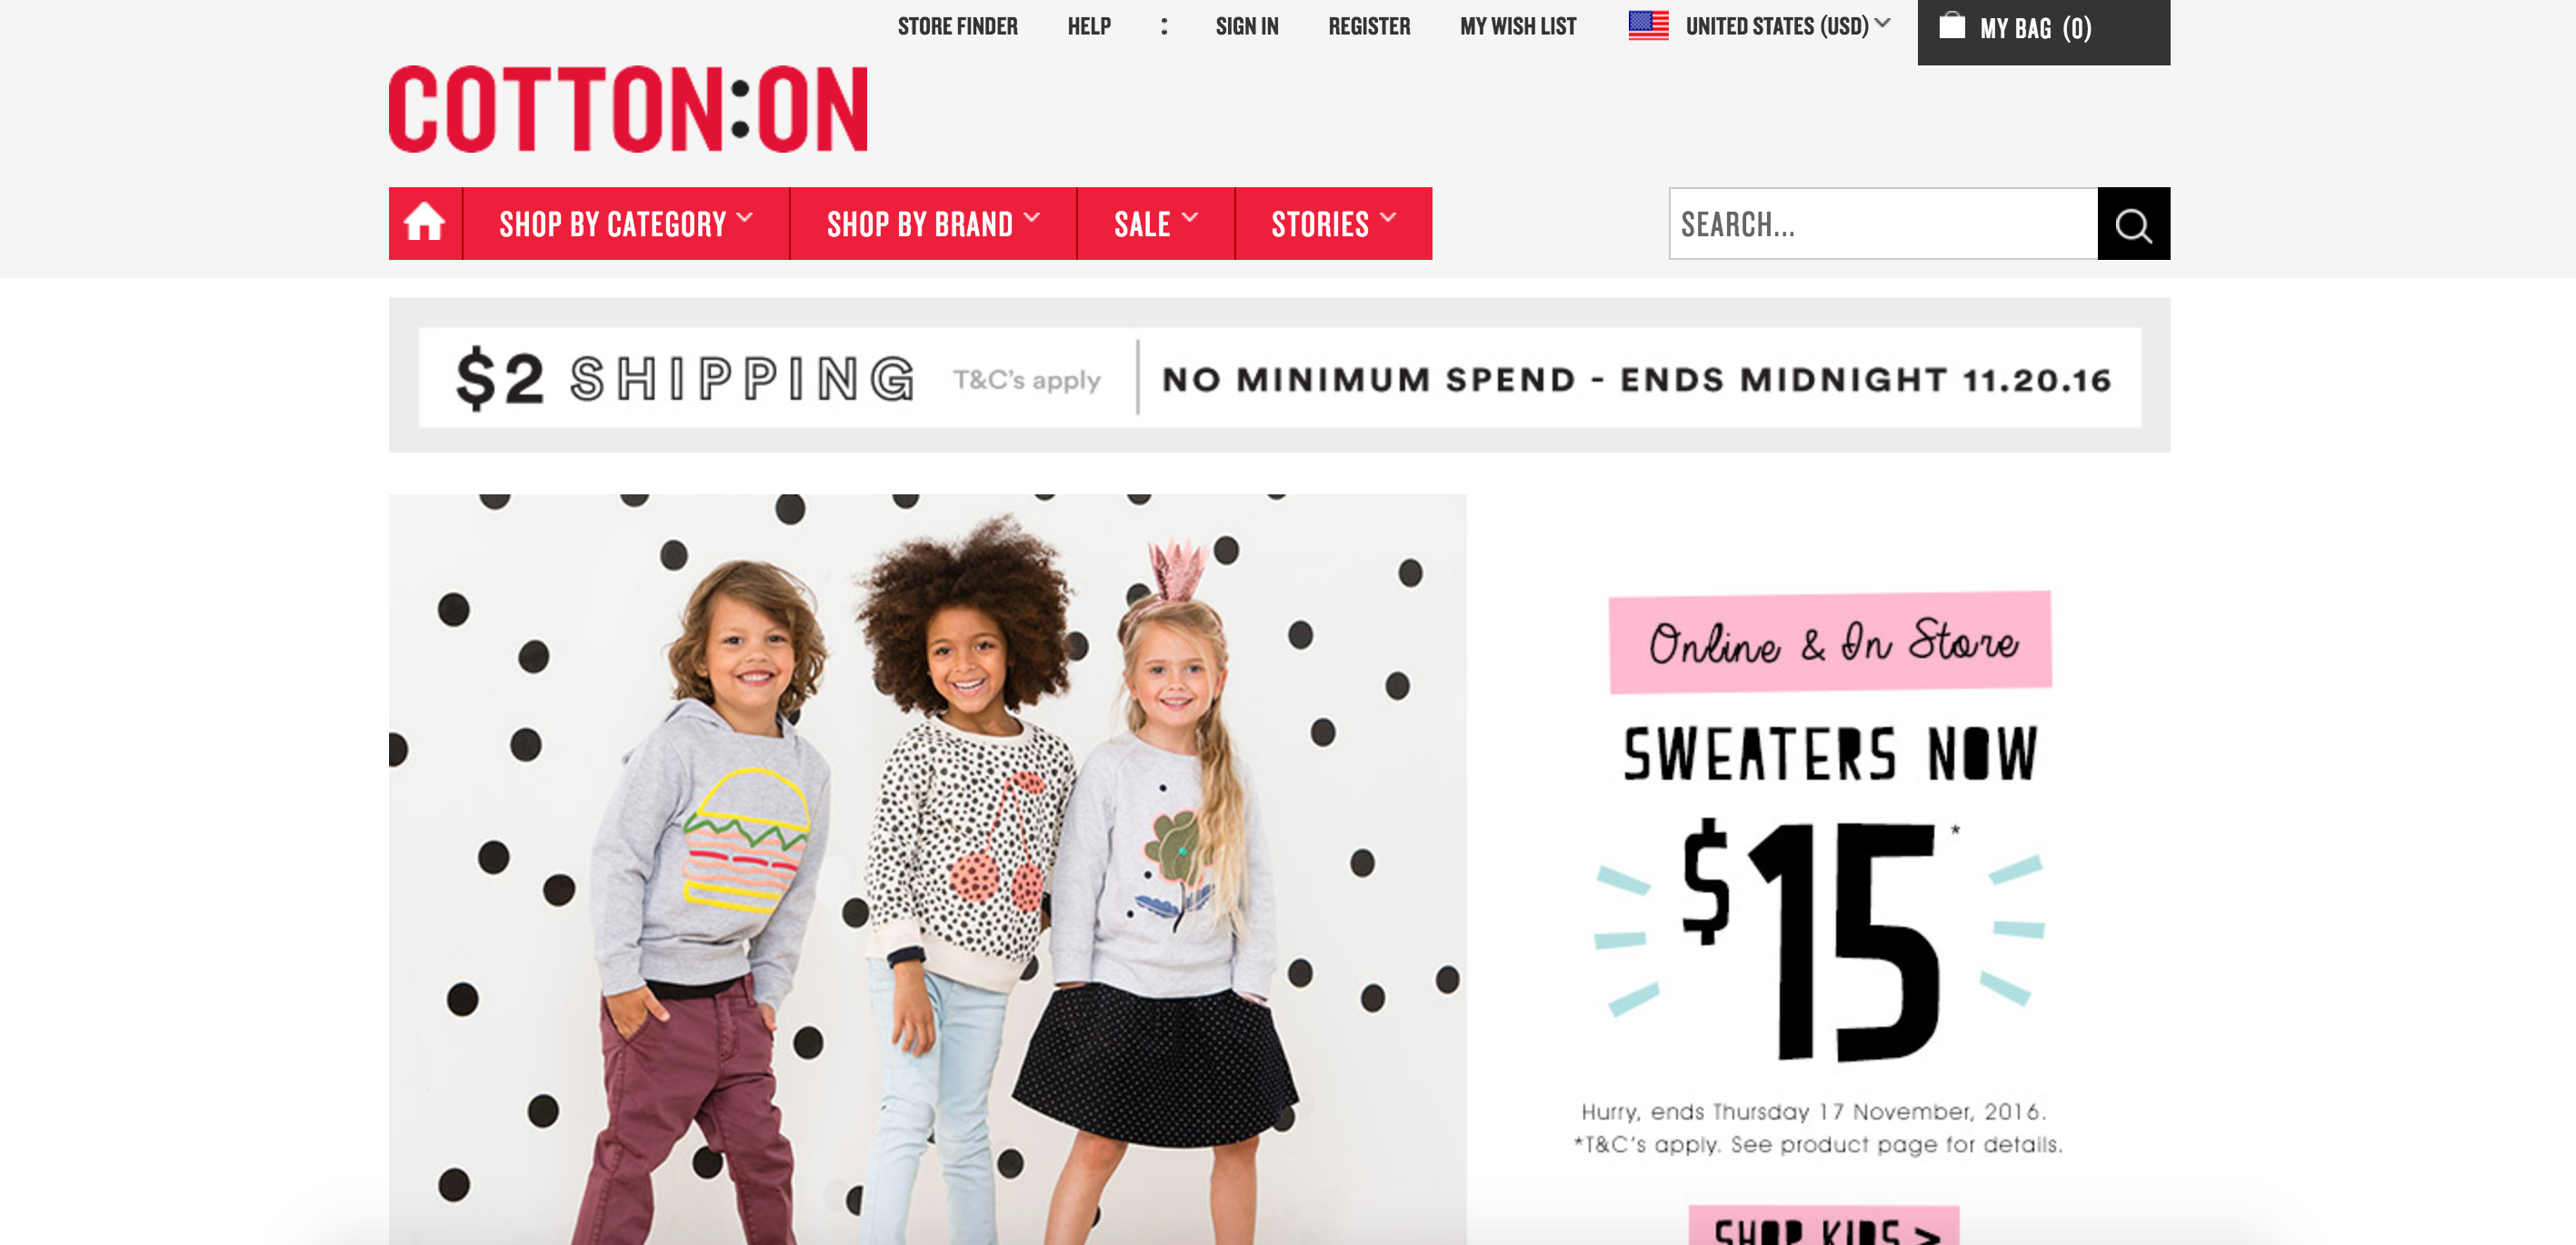 Cotton On Coupons & Cash Back